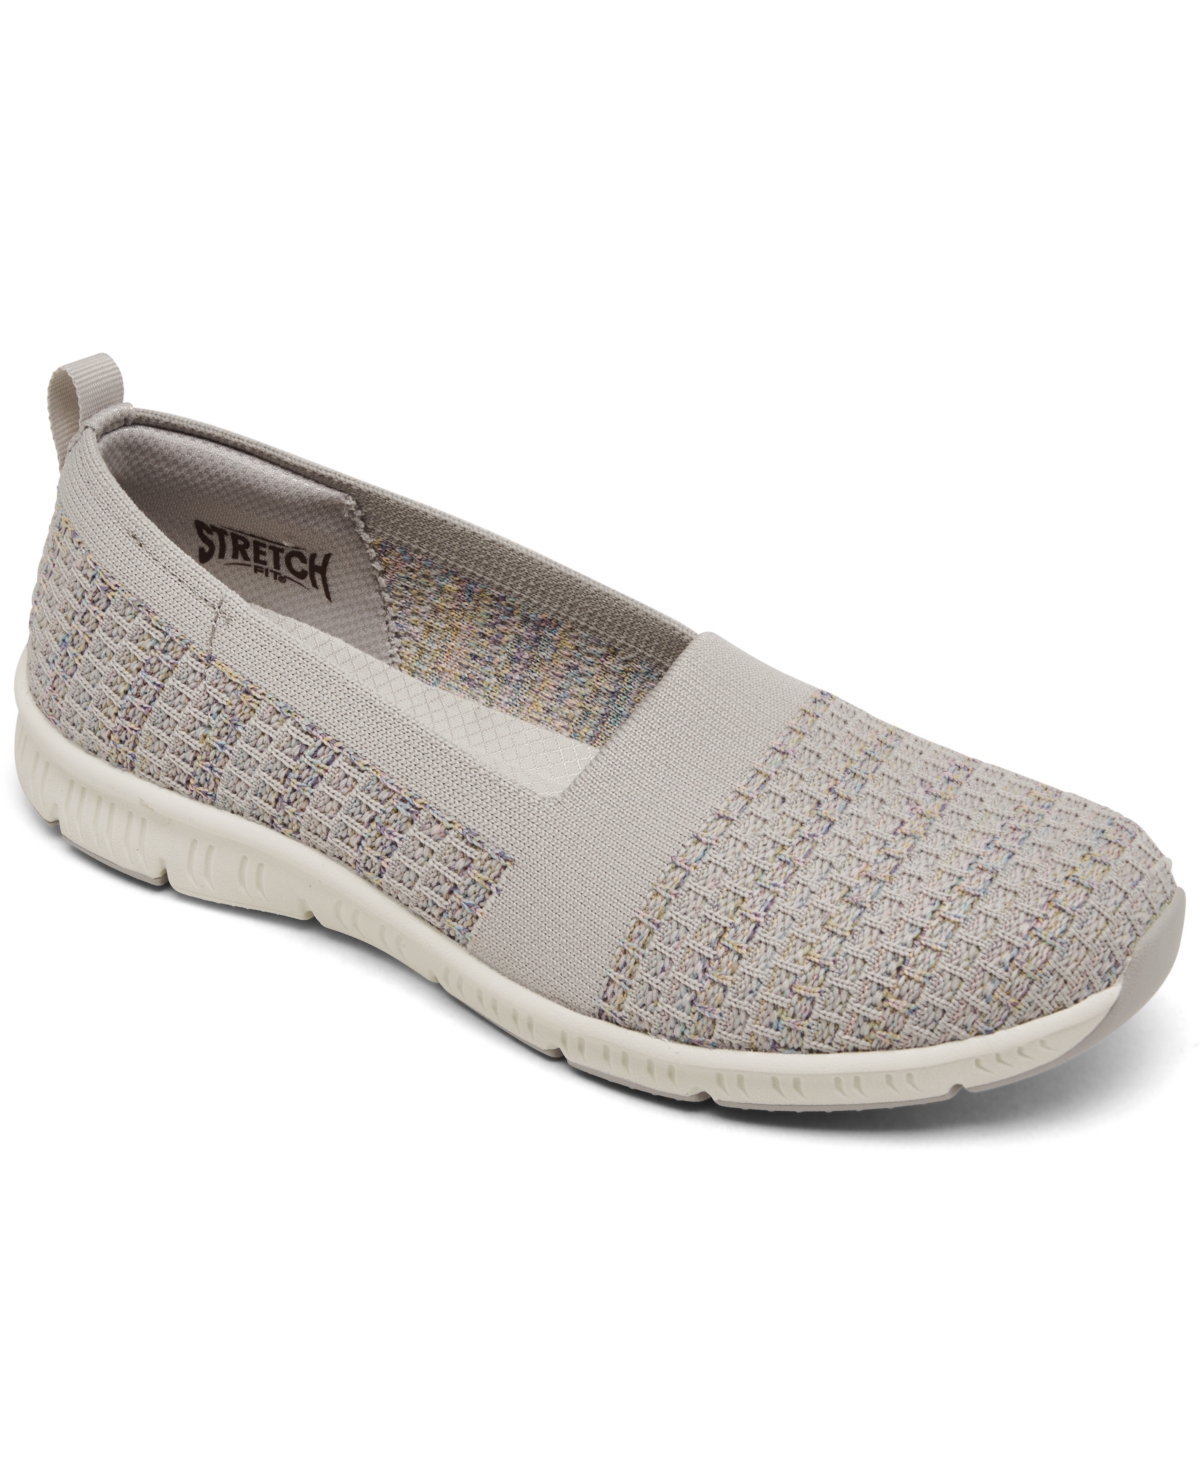 Women's Be Cool - Sherbet Skies Casual Sneakers from Finish Line - Gray/multi